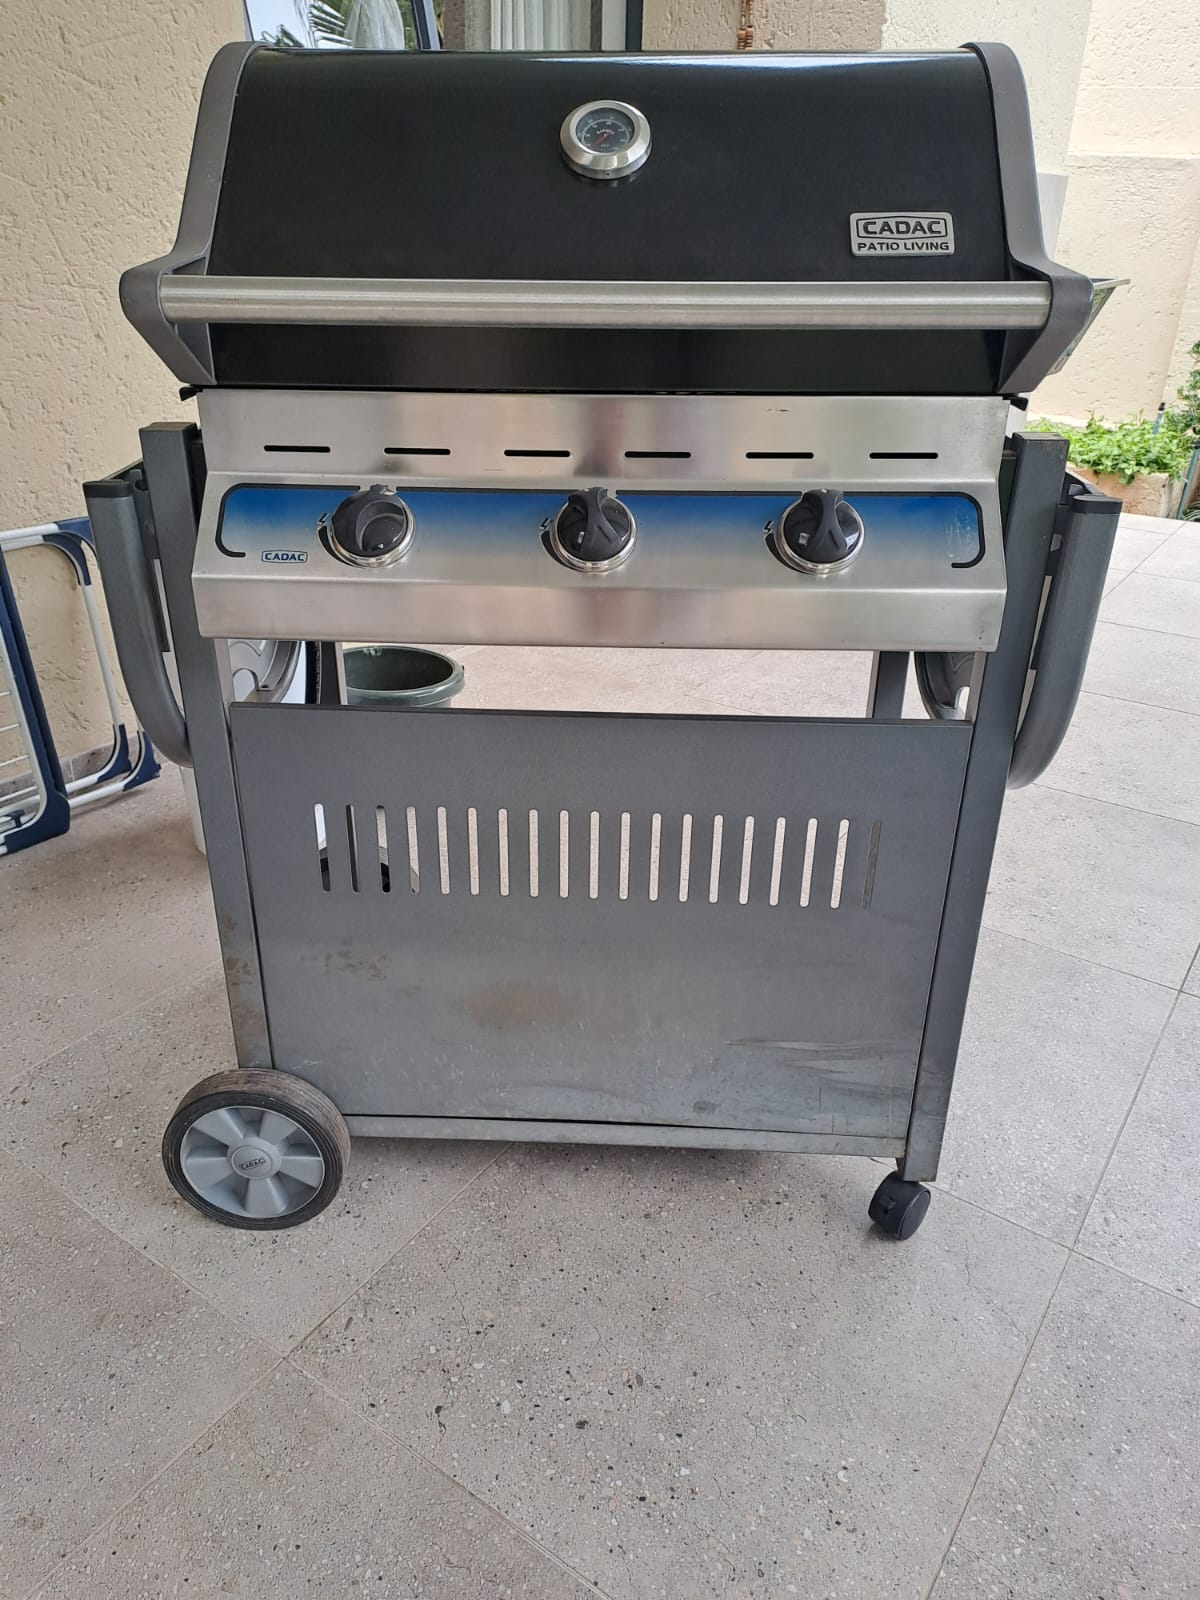 gift officiel flyde Cadac gas braai, with cover, excellent condition | Junk Mail